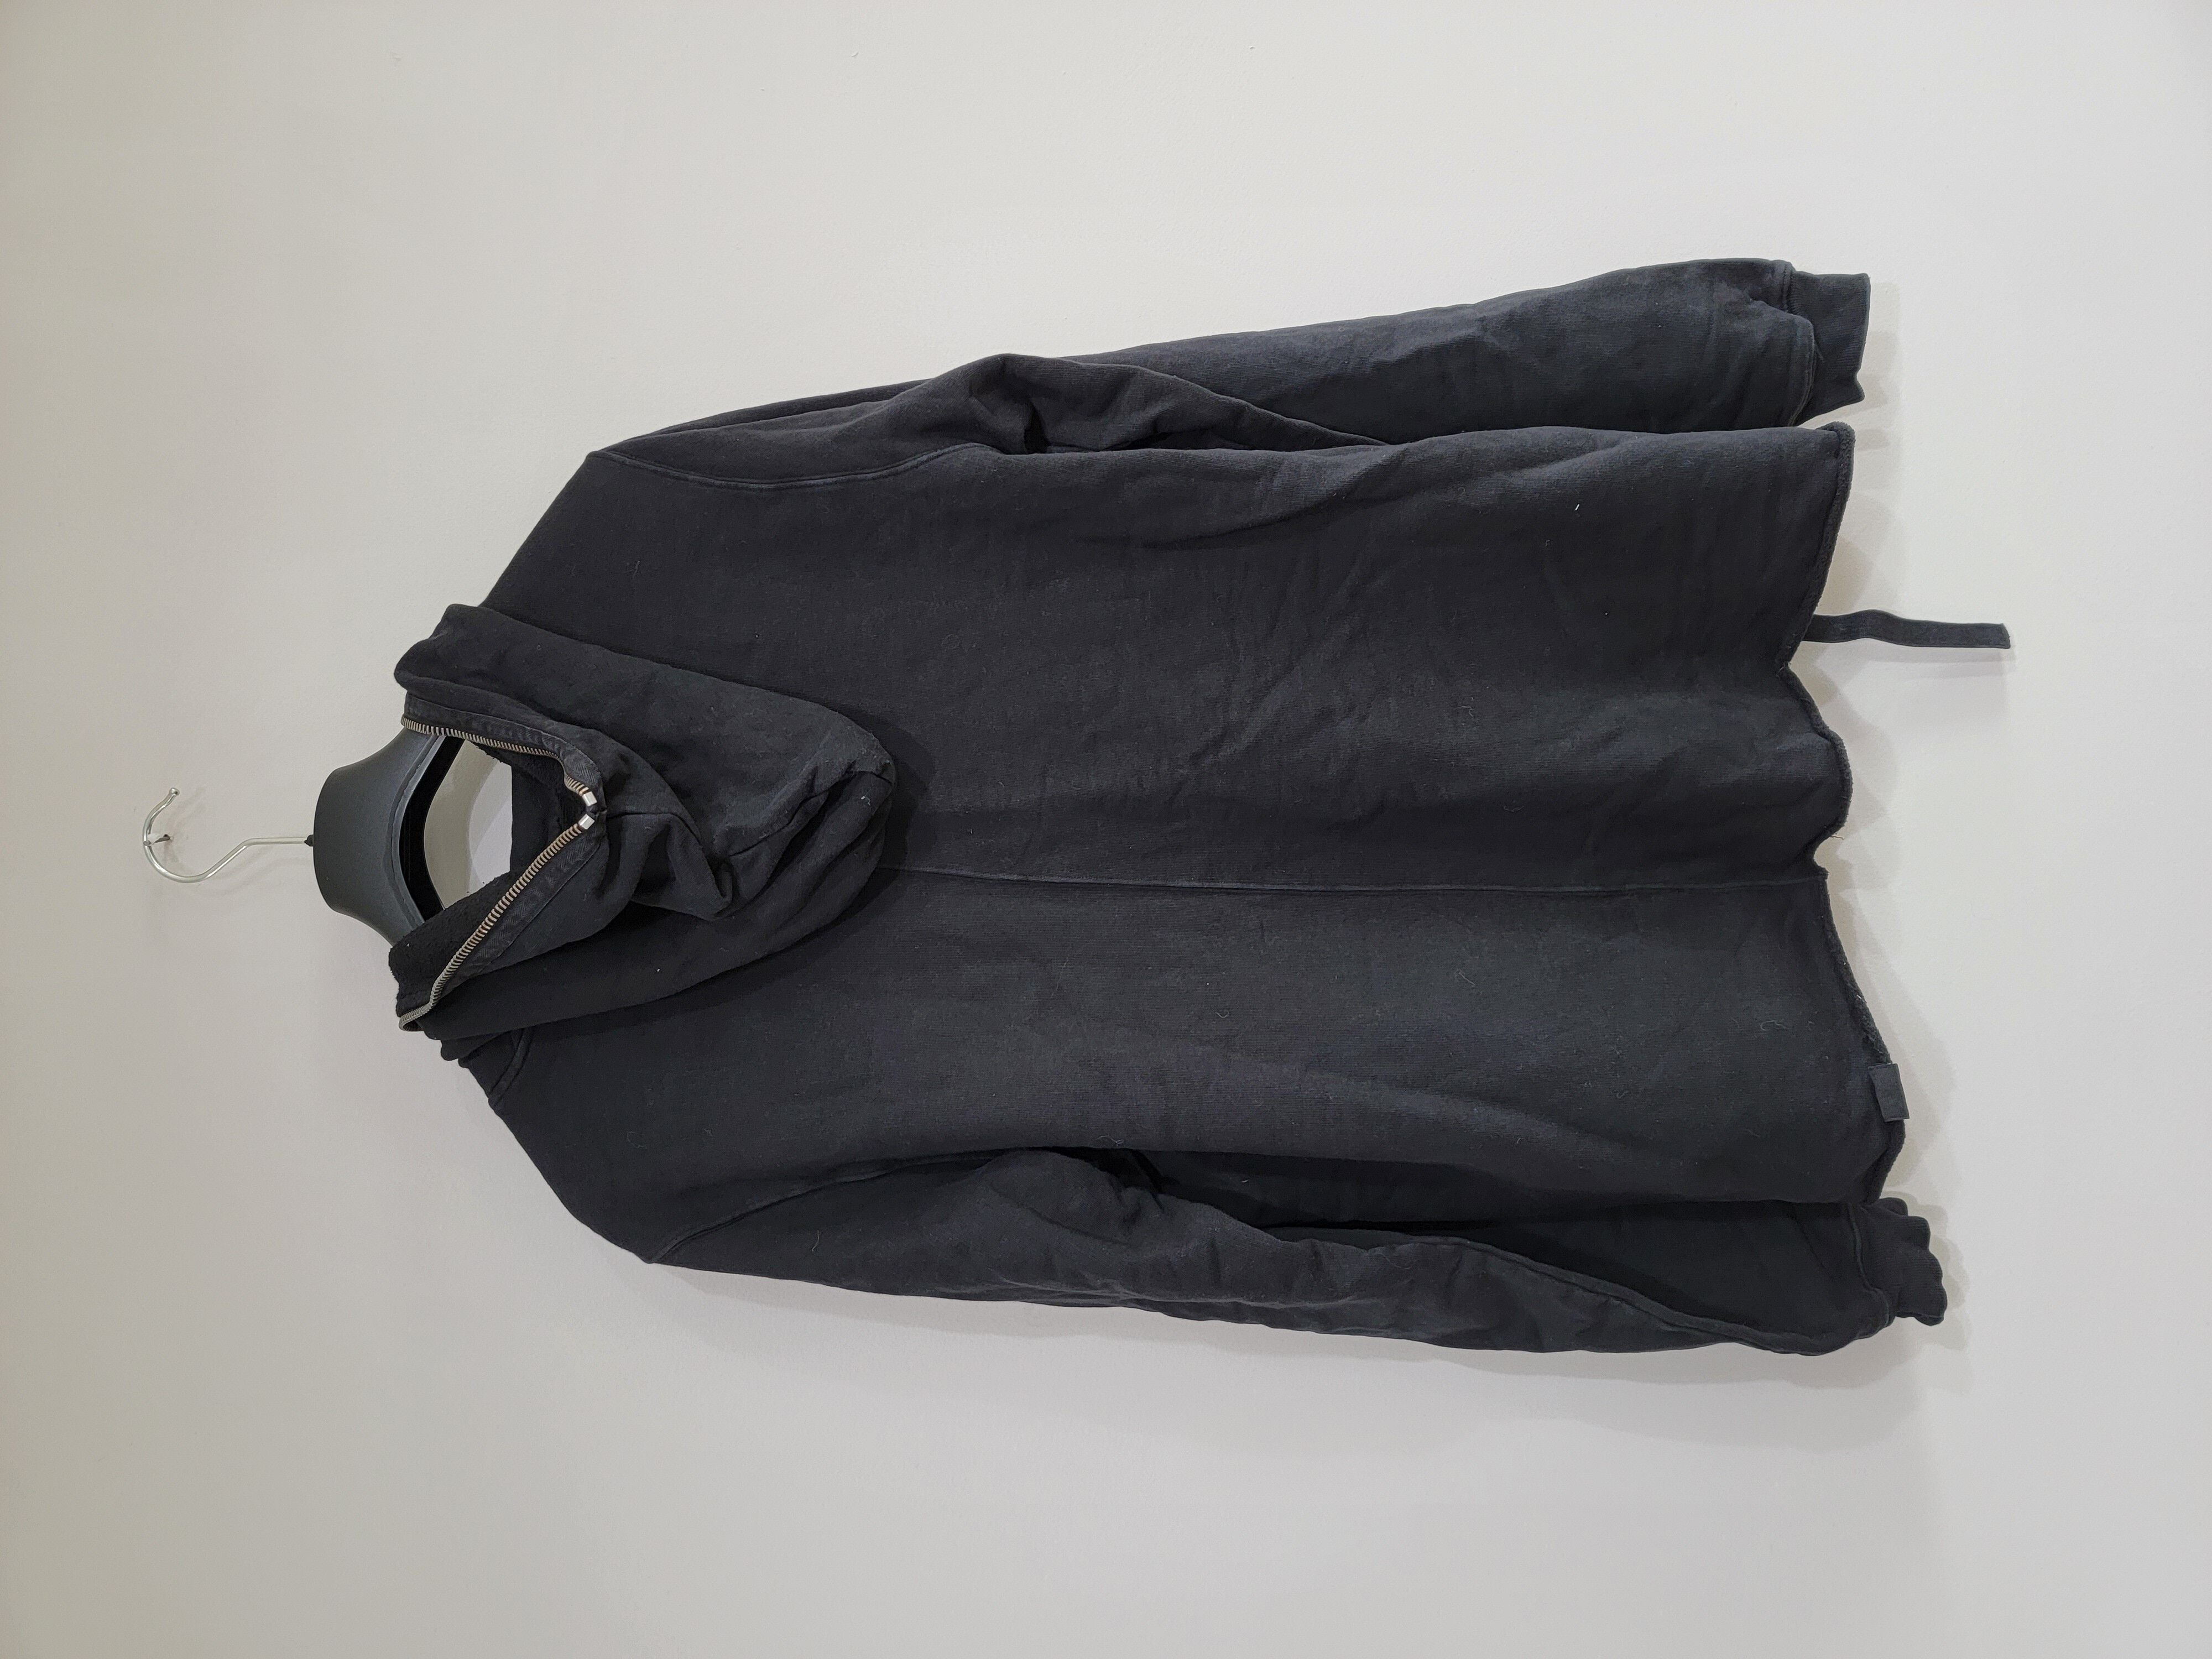 Rick Owens Vintage Rick Owens Gimp hoodie with Harness and Strap Size US XL / EU 56 / 4 - 2 Preview